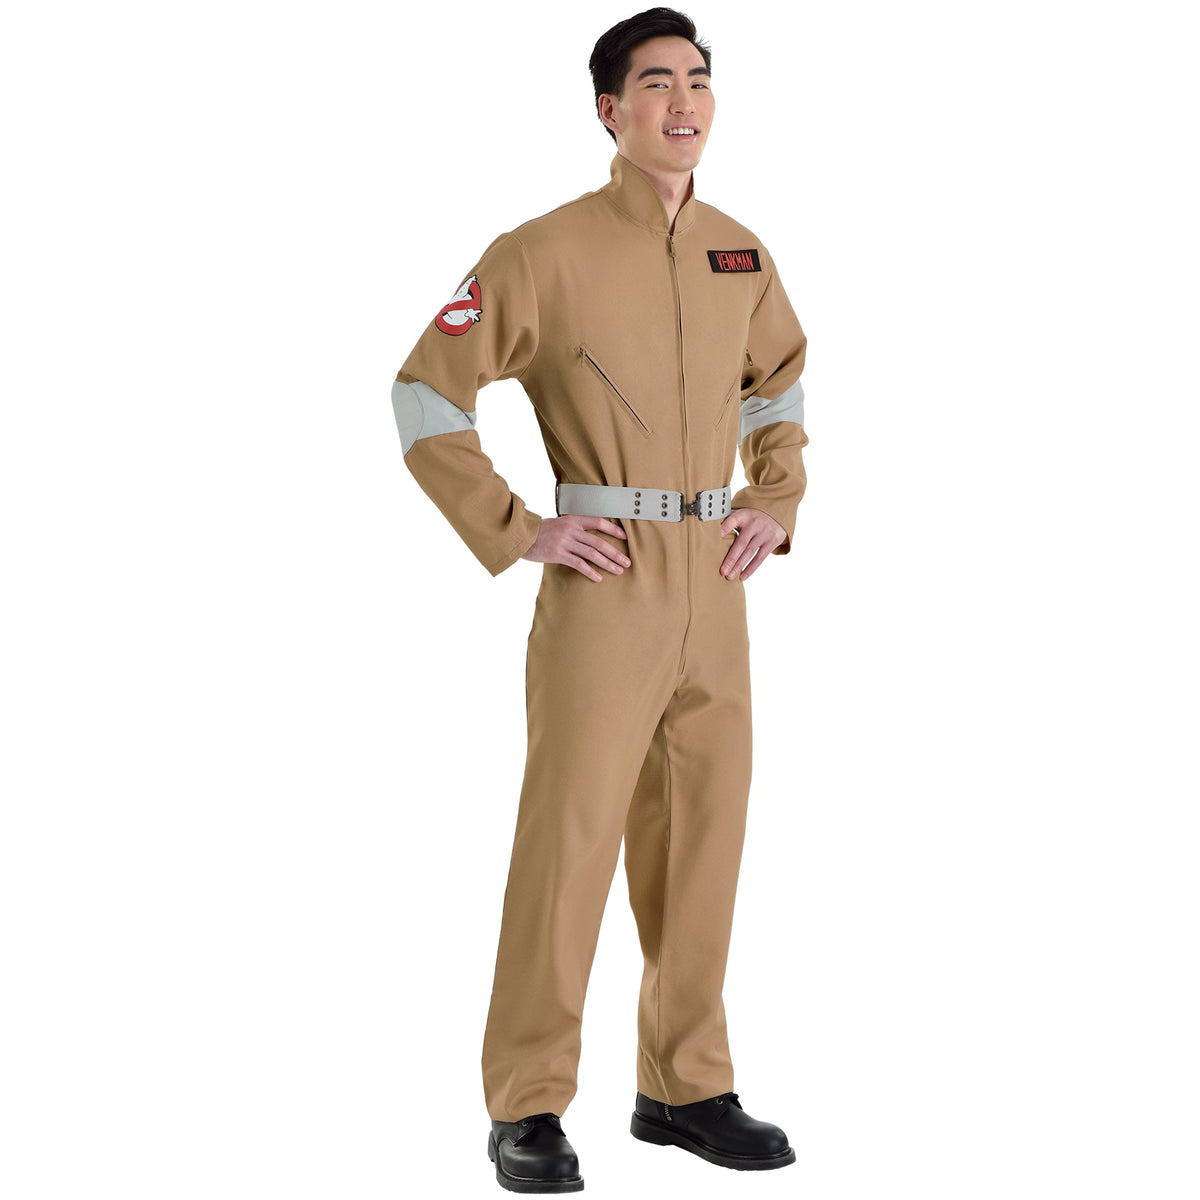 HALLOWEEN COSTUME CO. Costumes Ghostbusters Classic Costume for Adults, Beige Jumpsuit